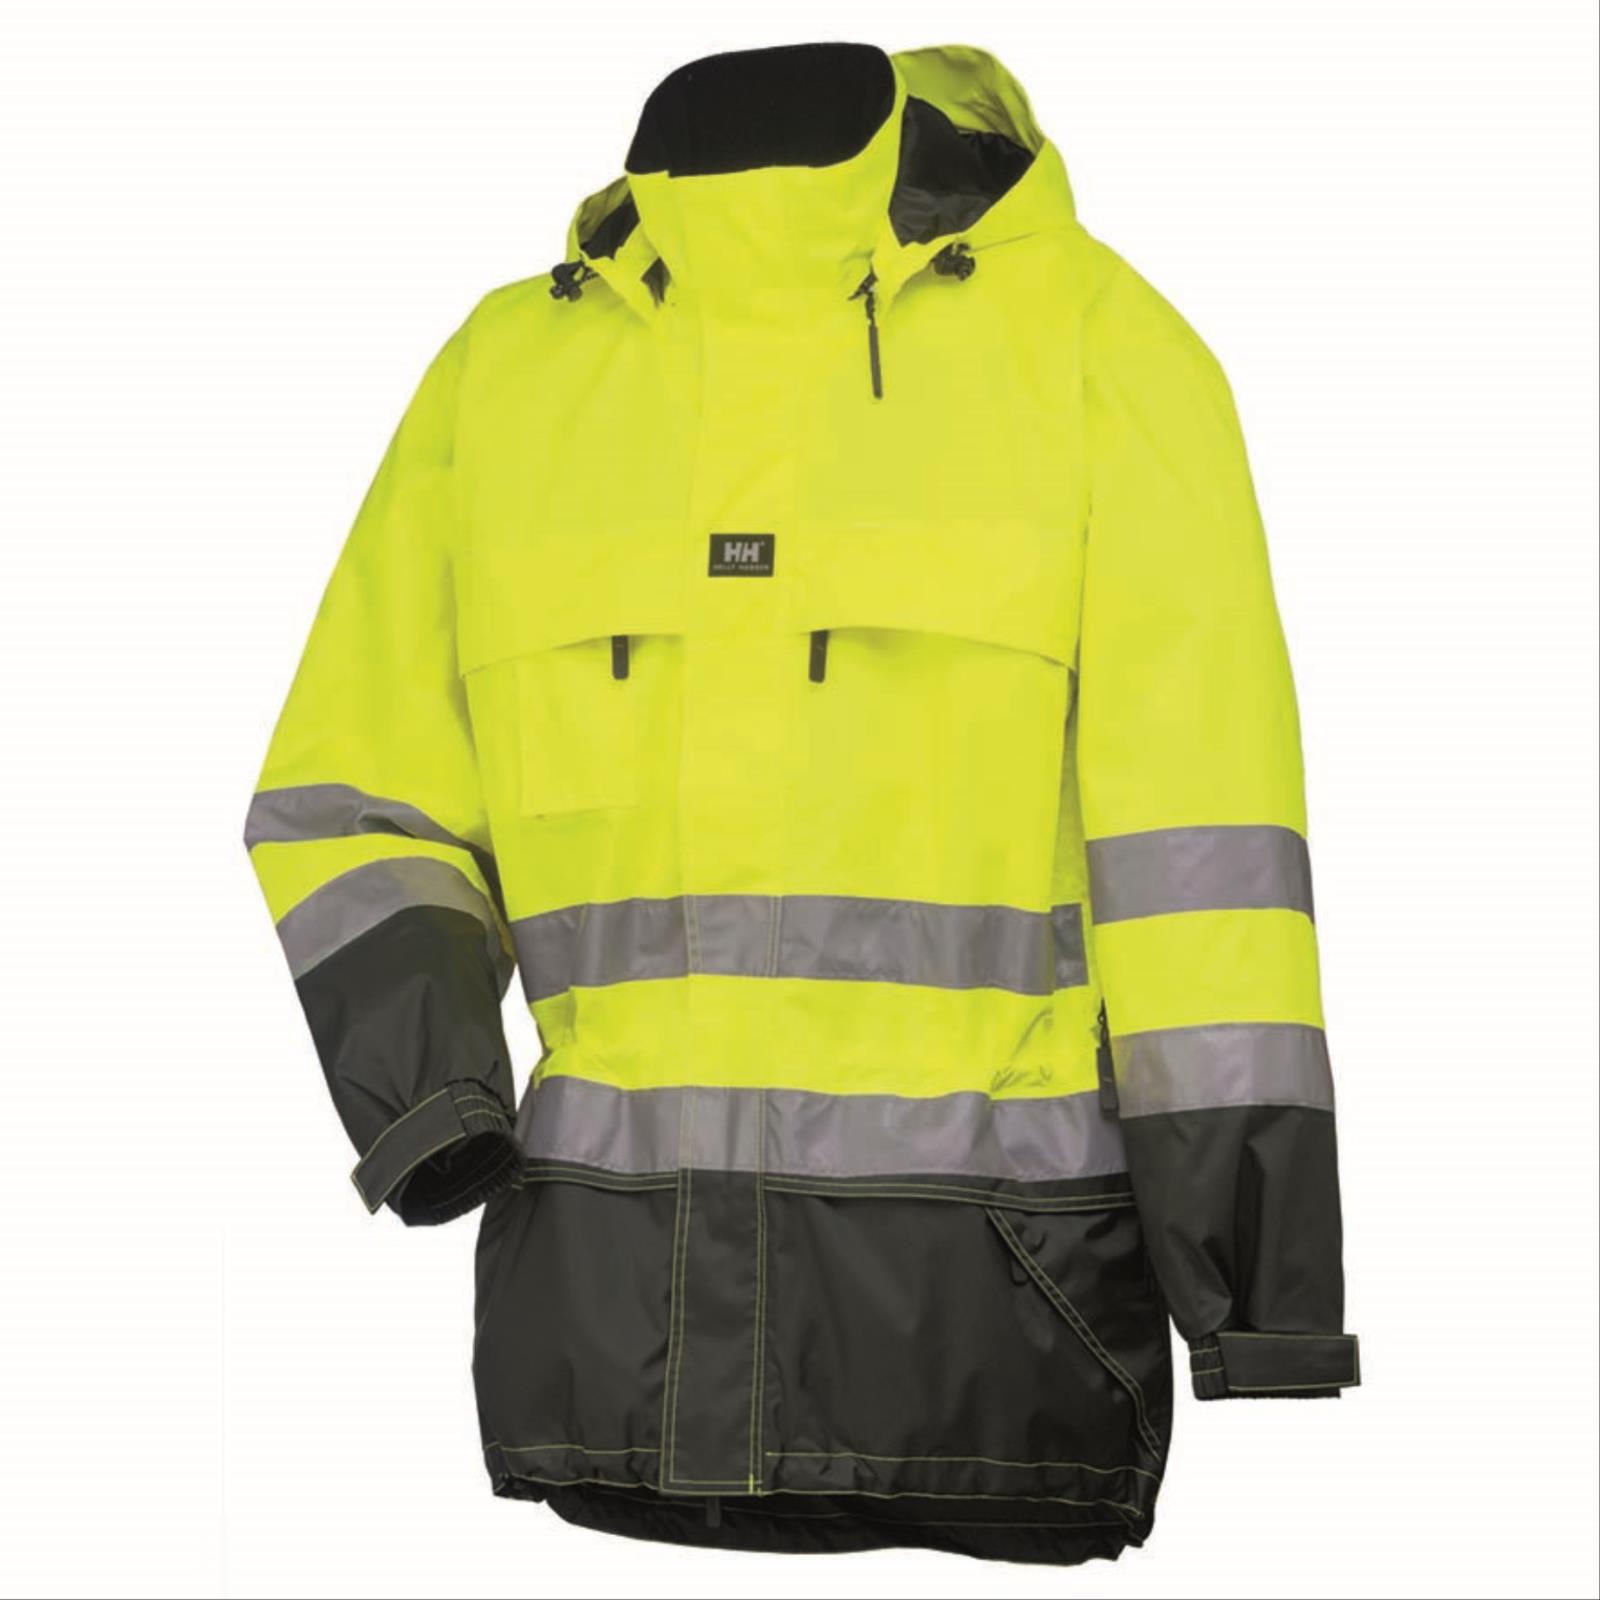 Safety Products Inc - Potsdam Jacket, Class 3 Type R